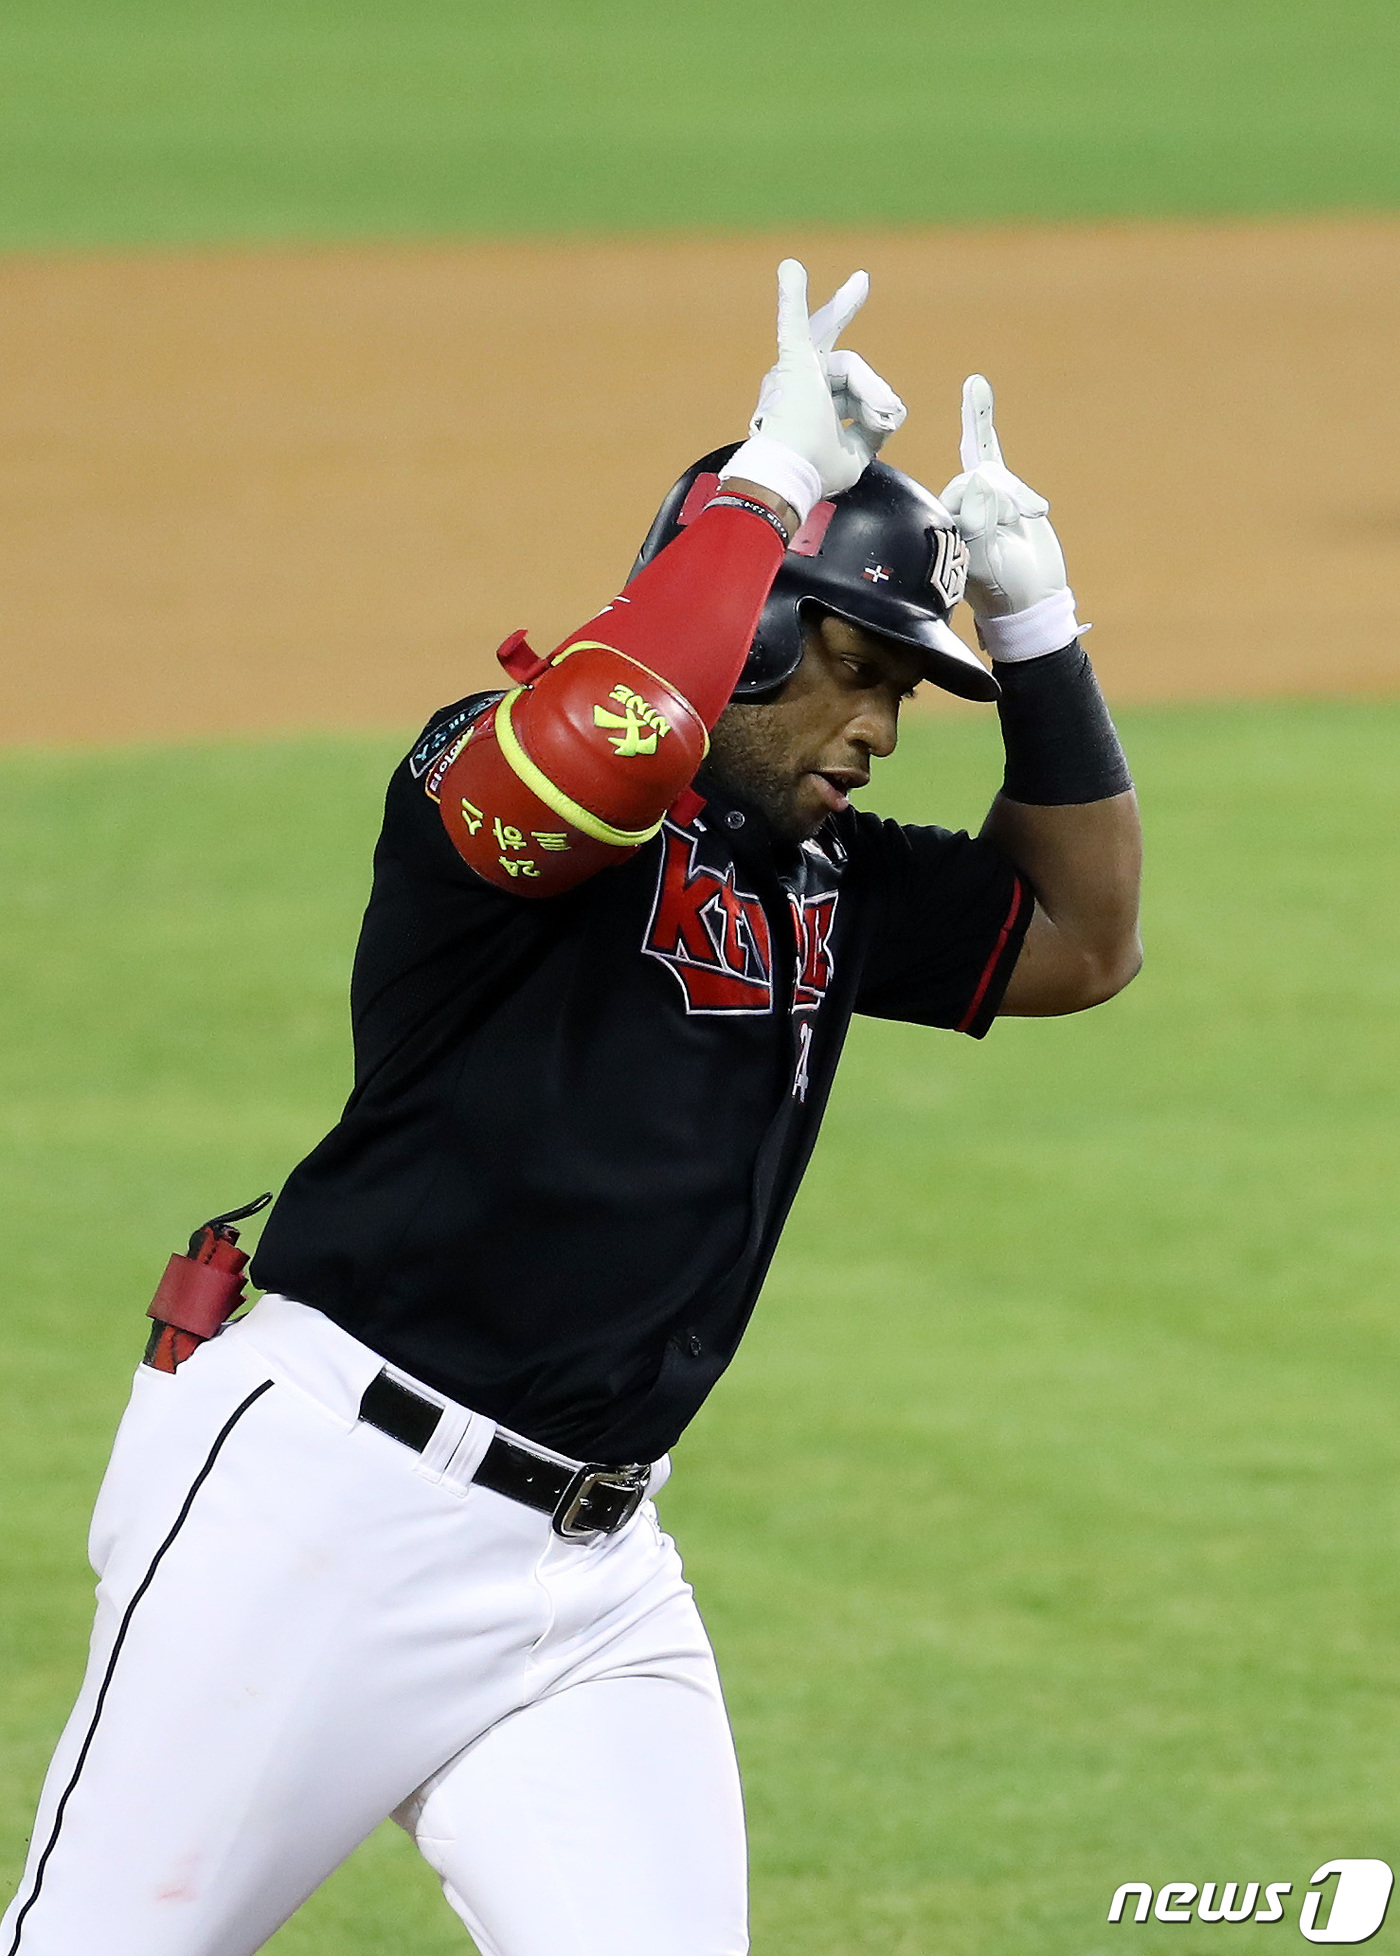 Luis Rojas started the game with a third-time hitter in the 2020 Shinhan Bank SOL KBO League LG Twins at KT Wiz Park in Suwon on the 2nd, and he hit the second ball of LG starter Lee Min-ho in the first inning, 0-0.Season 40.Luis Rojas opened the gap with second-placed Roberto Ramos (LG, 38) with 40 homers.Luis Rojas, who joined KT in the 2017 season, also reached three points for the most career homers (43) he had recorded in 2018.